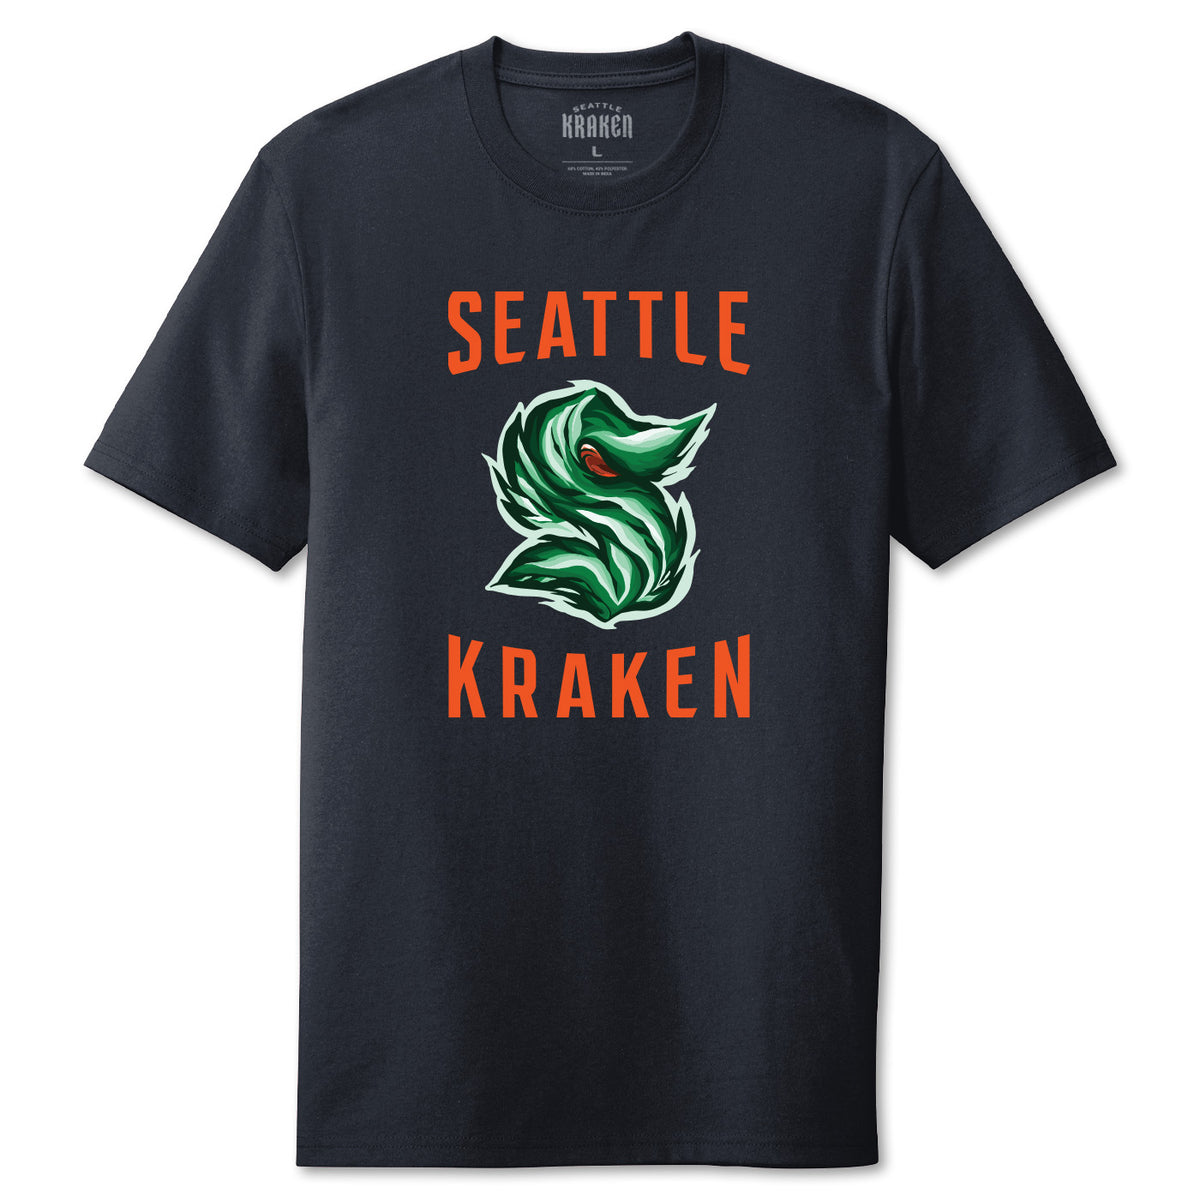 Seattle Kraken on X: On April 6, we're celebrating the natural beauty of  our home on Green Night, pres. by @Boeing 🌲 Designed by local muralist  Angelina Villalobos, the #SeaKraken will wear